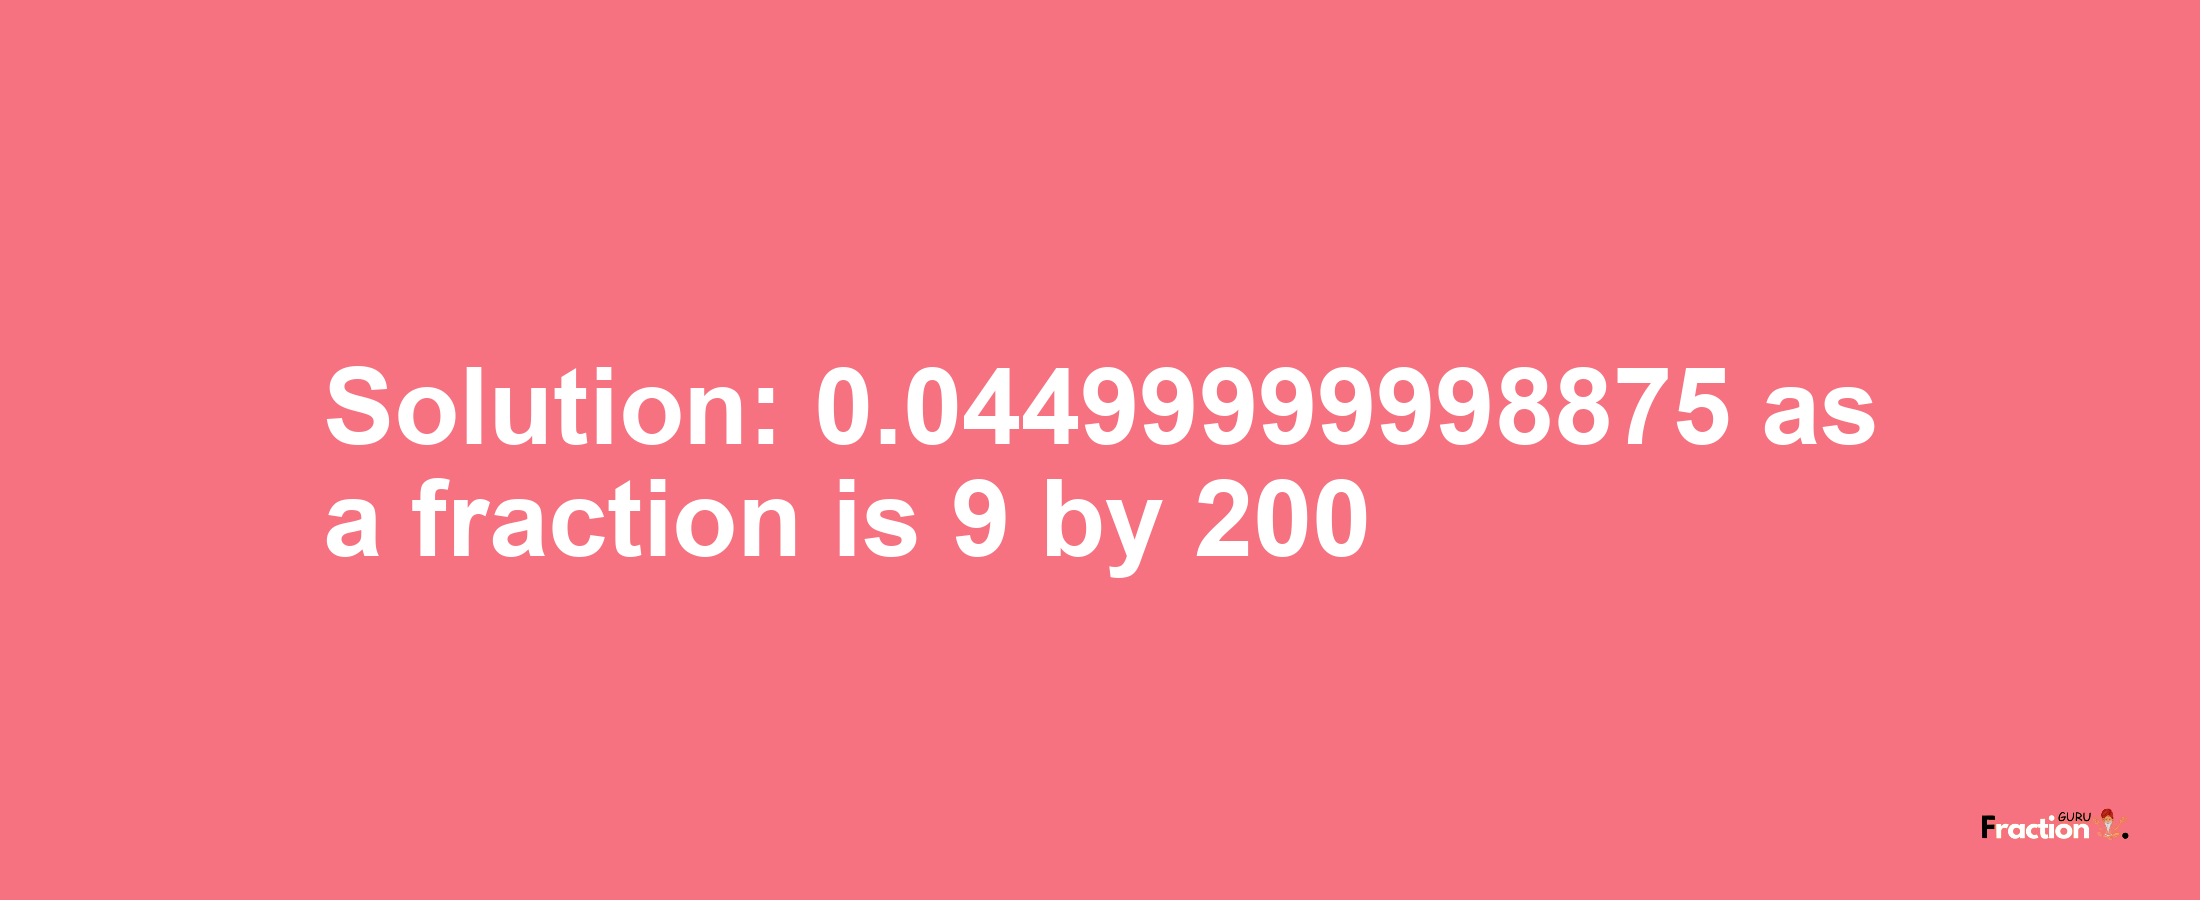 Solution:0.04499999998875 as a fraction is 9/200